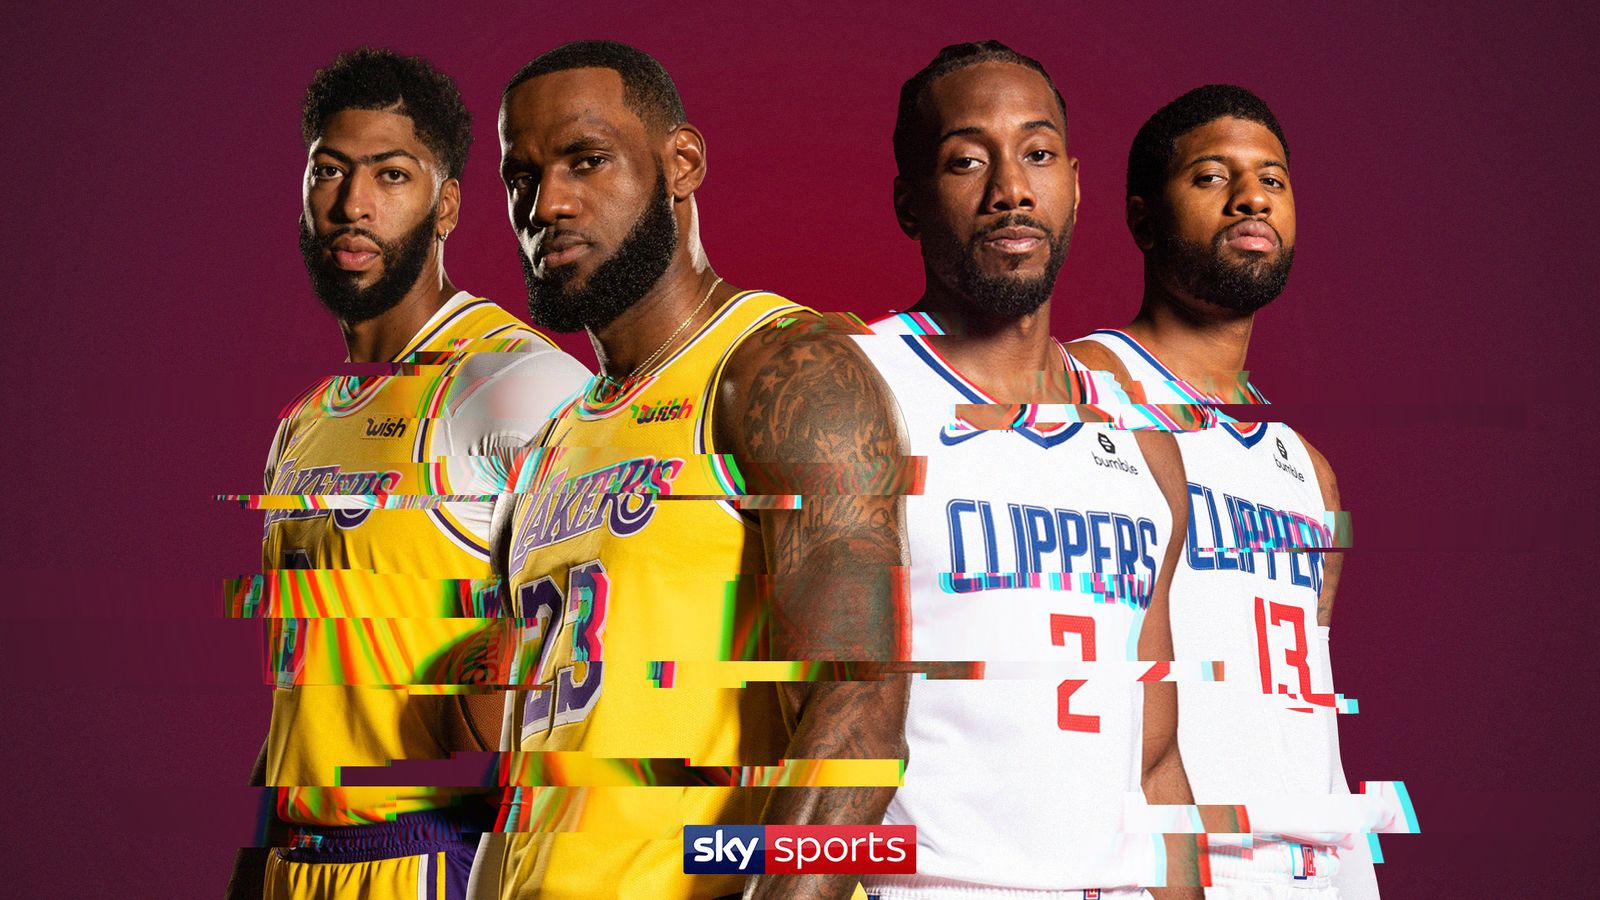 Los Angeles Lakers Losing To La Clippers In Restart Opener Would Be Damaging Says Bj Armstrong Nba News Sky Sports